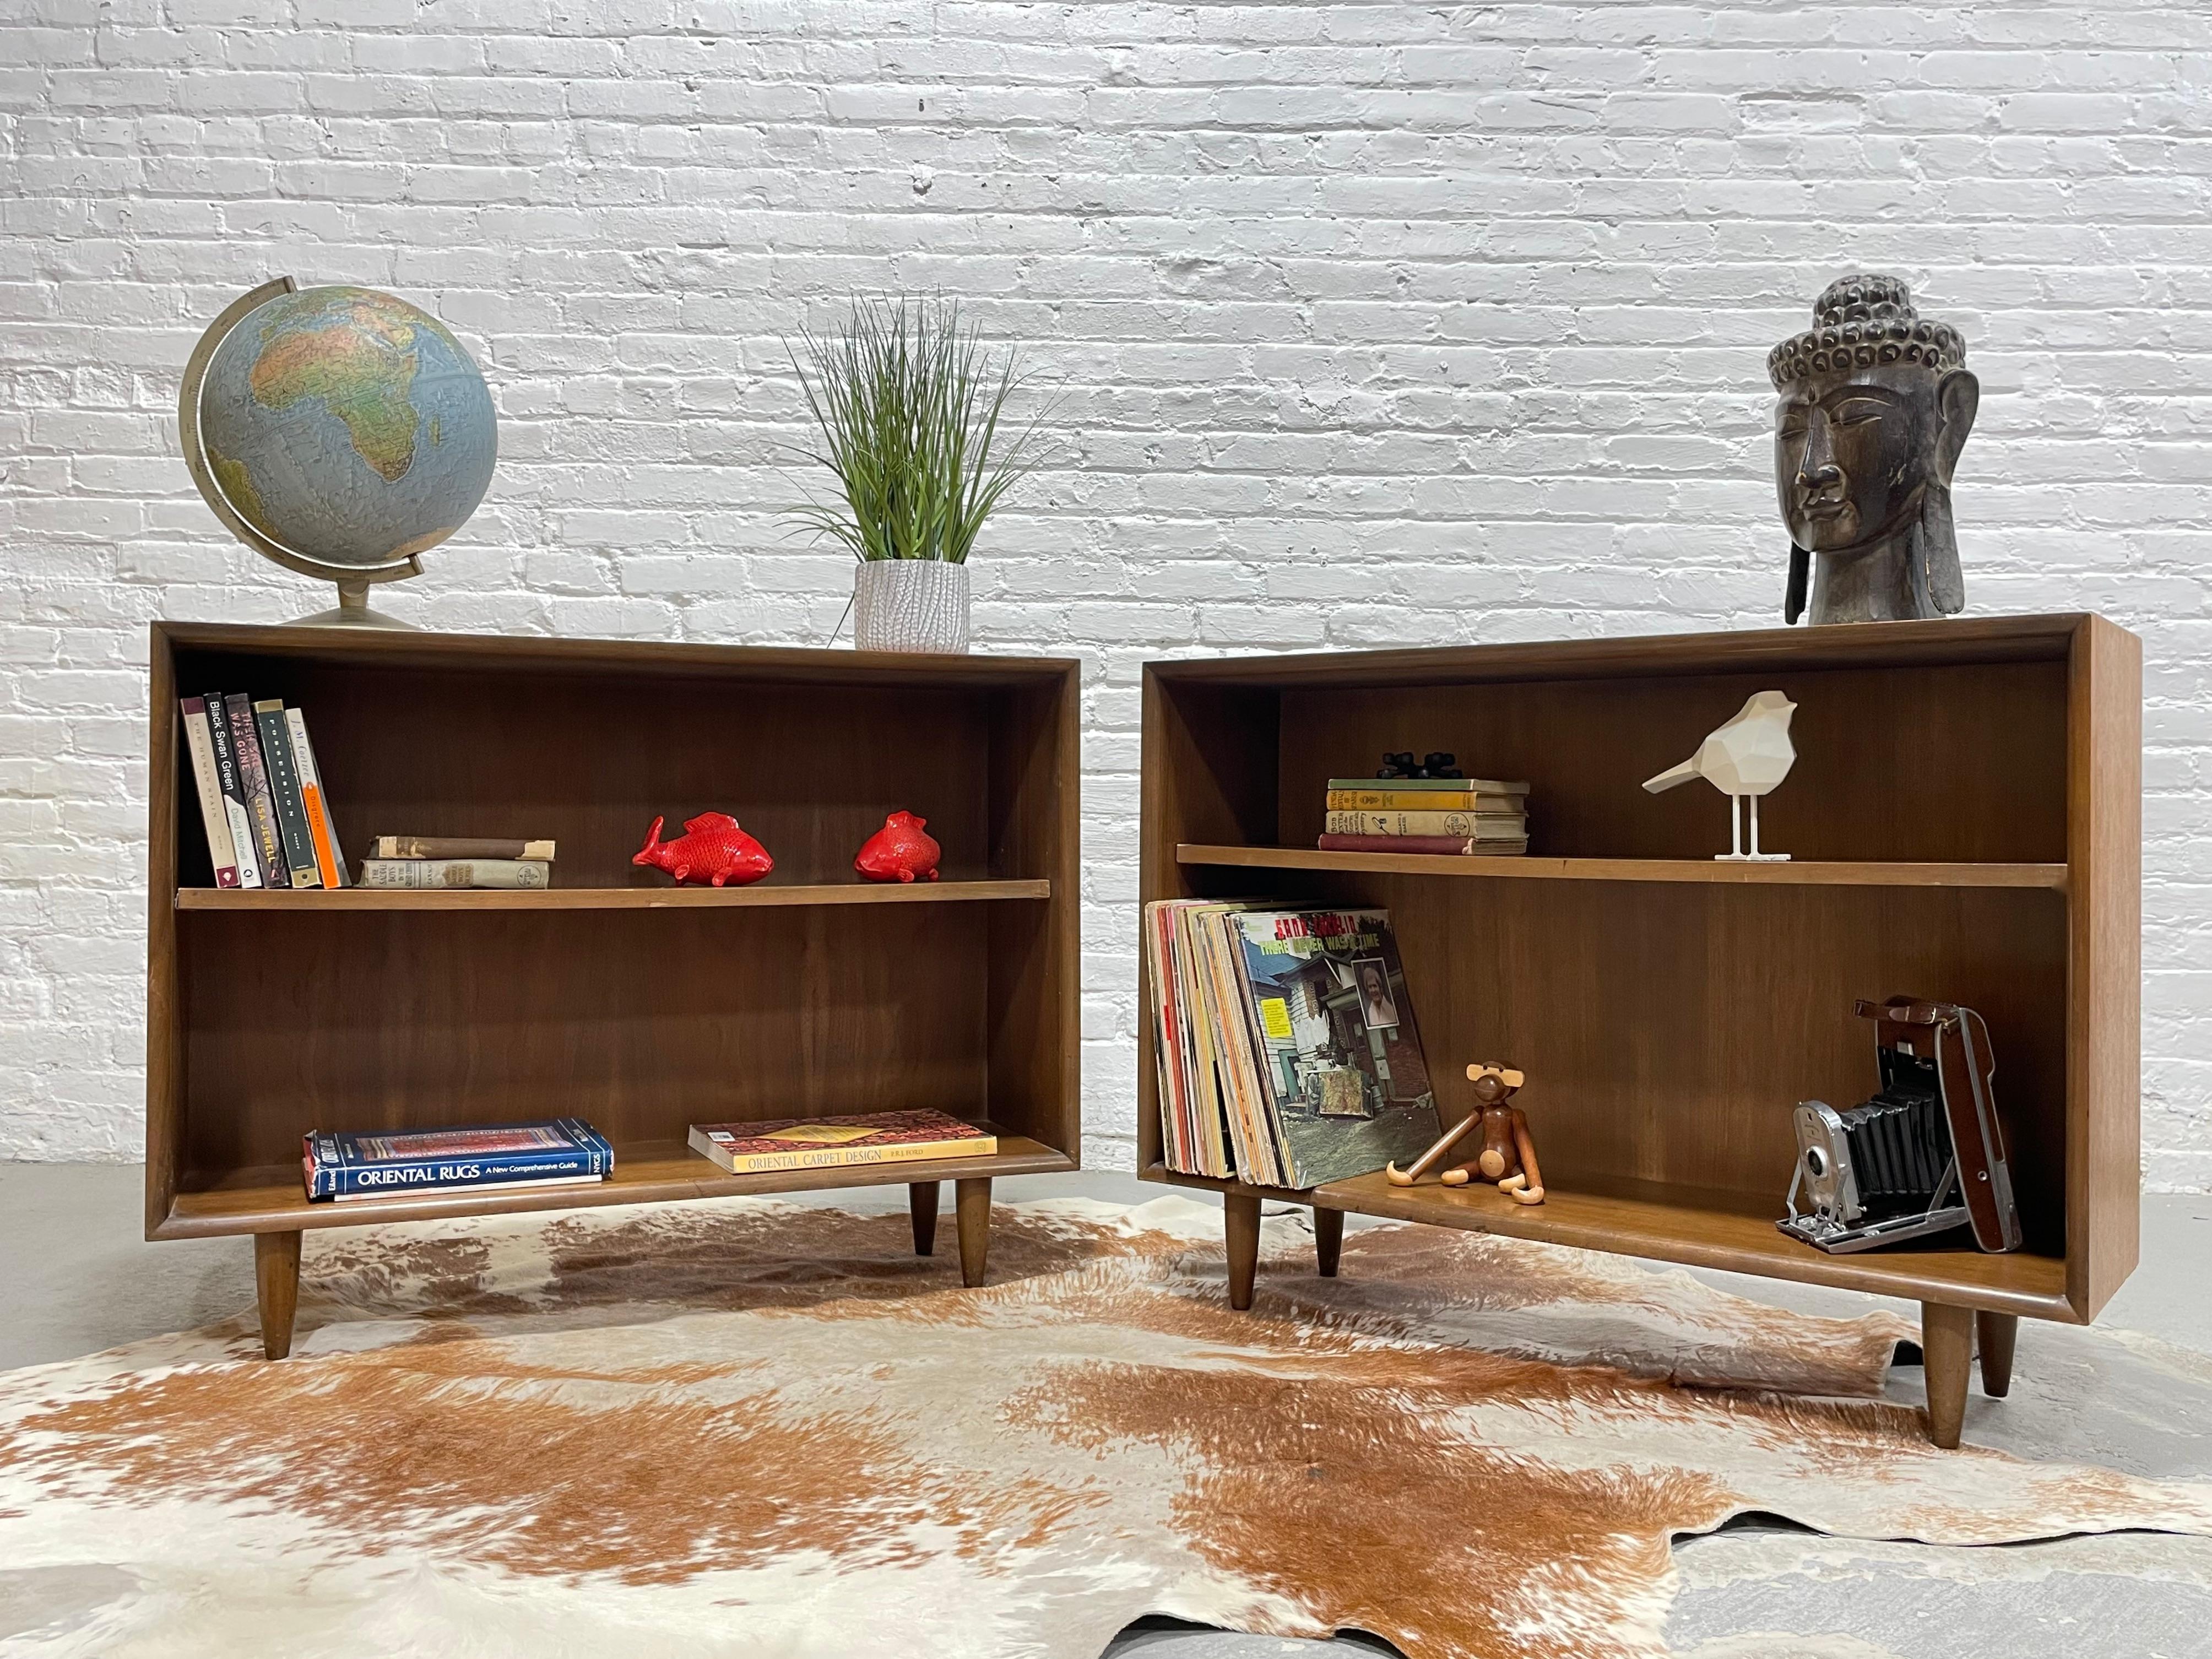 Pair of Mid Century Modern Walnut Bookcases. These apartment sized bookshelves feature super cute tapered legs and two rows of shelving space. Although the scale is small, don't be mislead by the storage space - you can fit a ton of books, vinyl